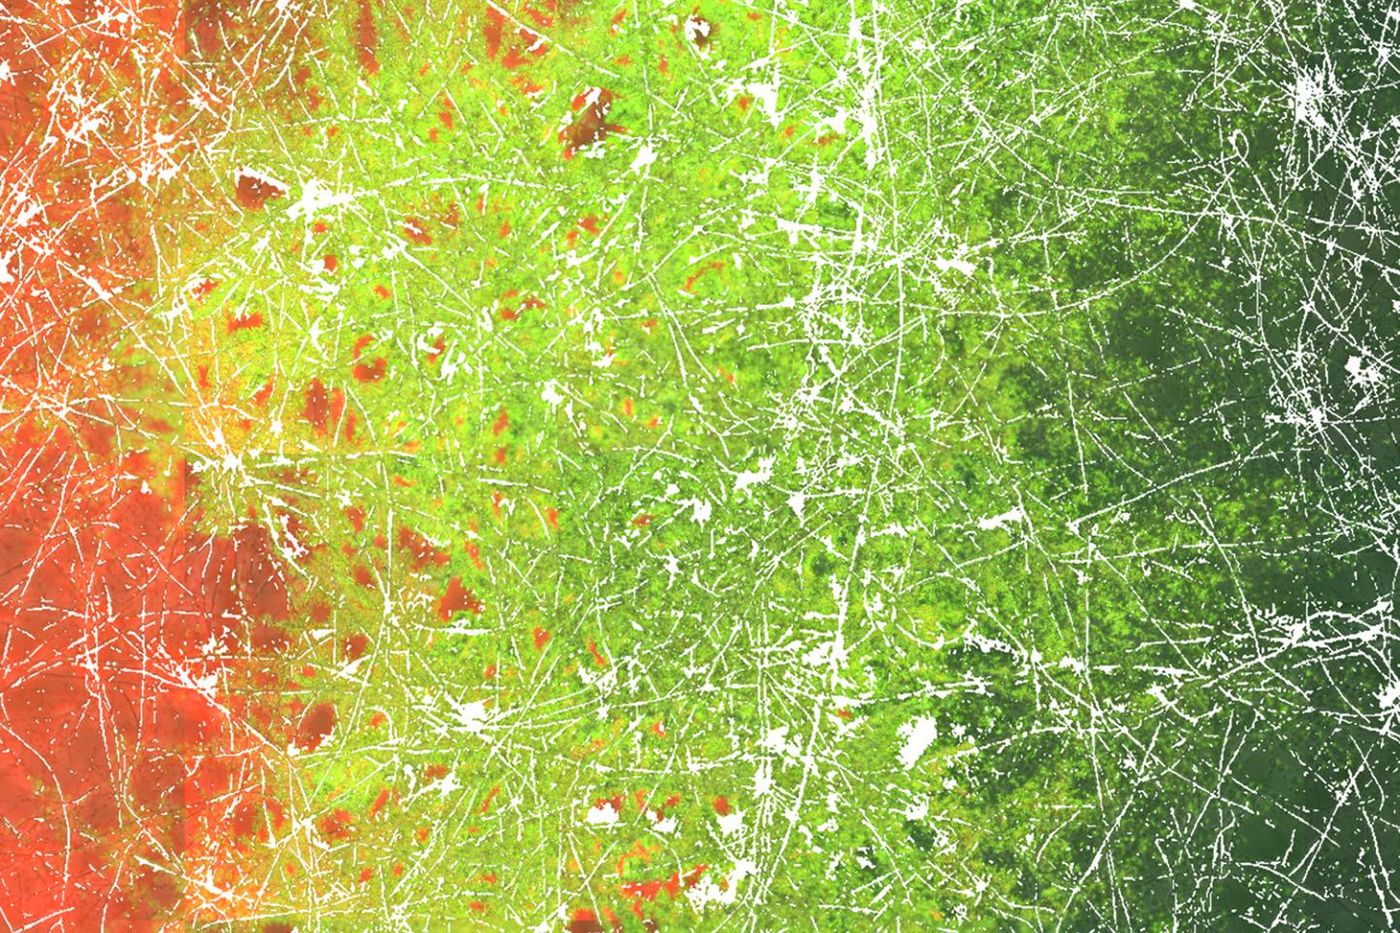 Micrograph visualising the distribution of transconjugant bacteria (in green) along a hyphal network (in white). Transconjugant bacteria are formed by direct contact and horizontal gene transfer of differing bacteria (in red and black) invading the hyphae from the right and the left side, respectively. /Credit: Berthold et al. 2016 in Scientific Reports